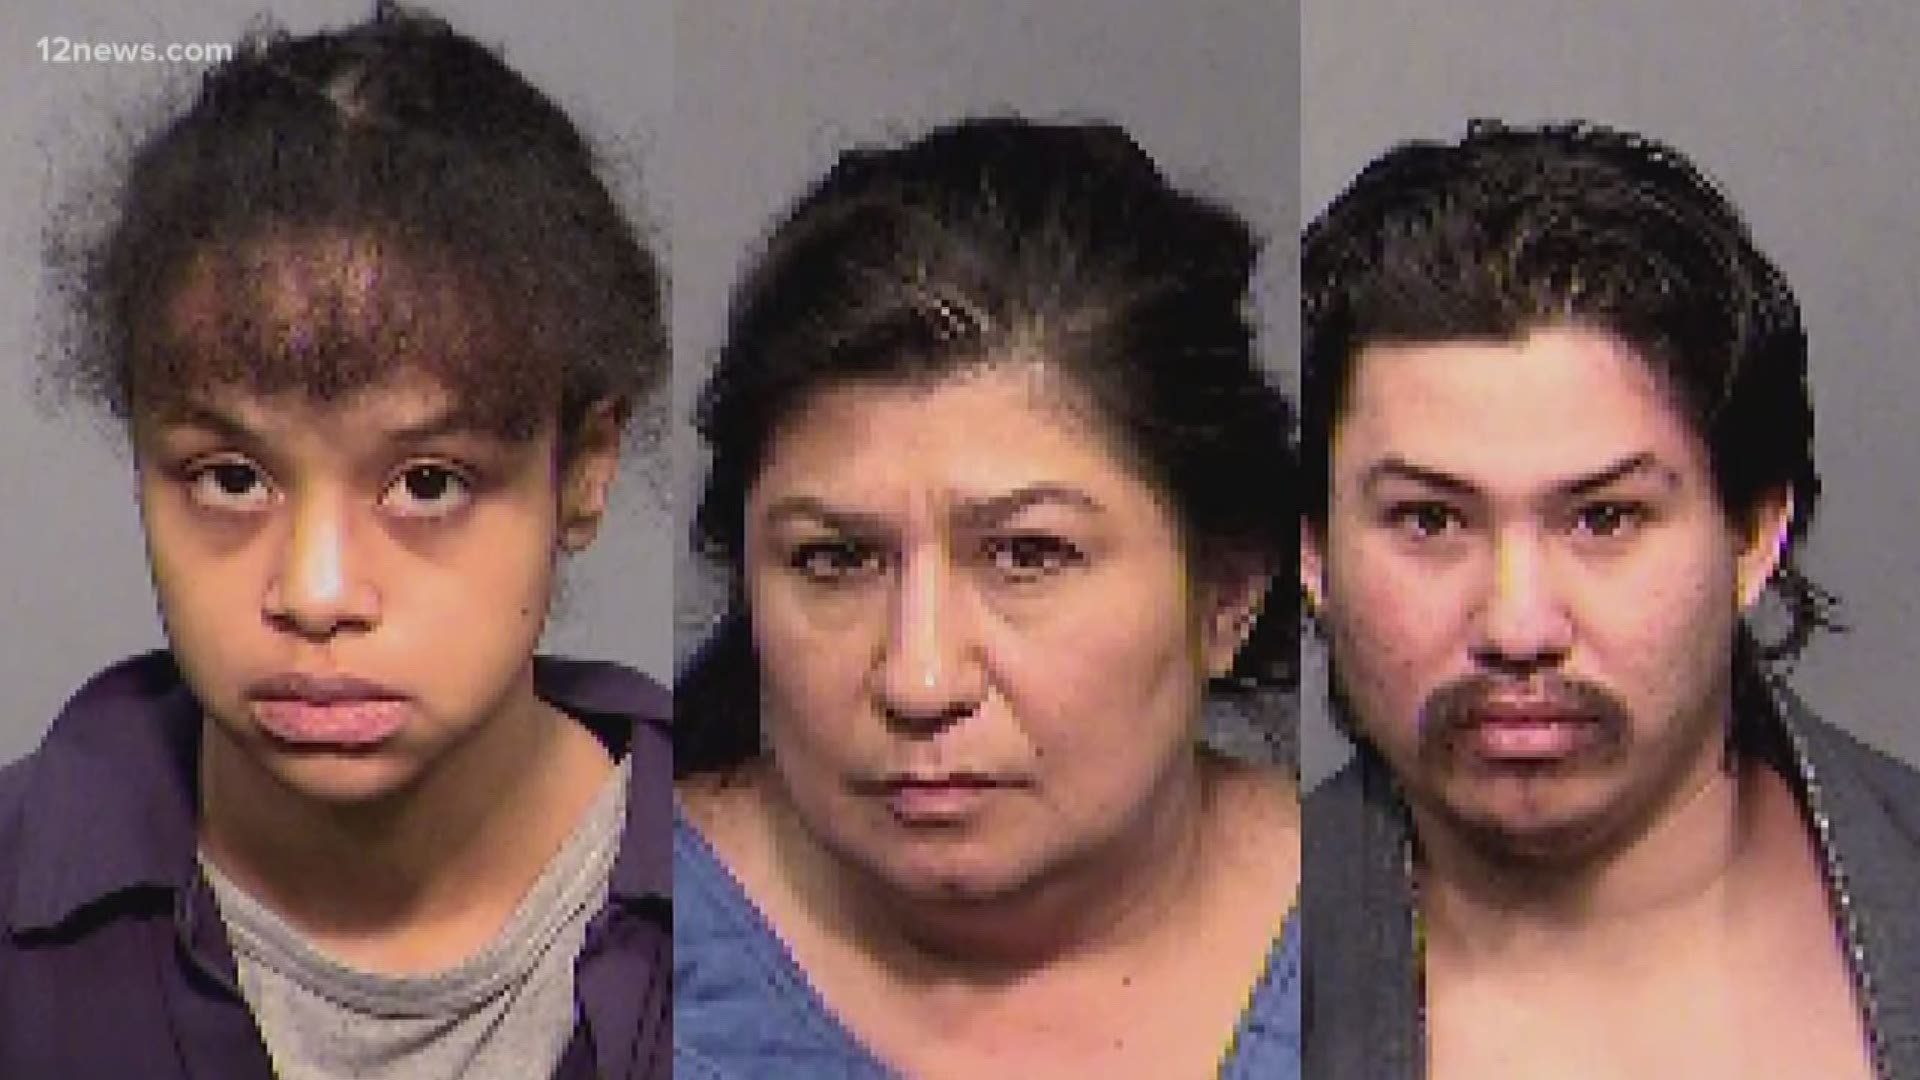 A 6-year-old boy was found dead in Flagstaff. His parents and grandma are facing homicide and child abuse charges. They allegedly kept him & his brother in a closet.